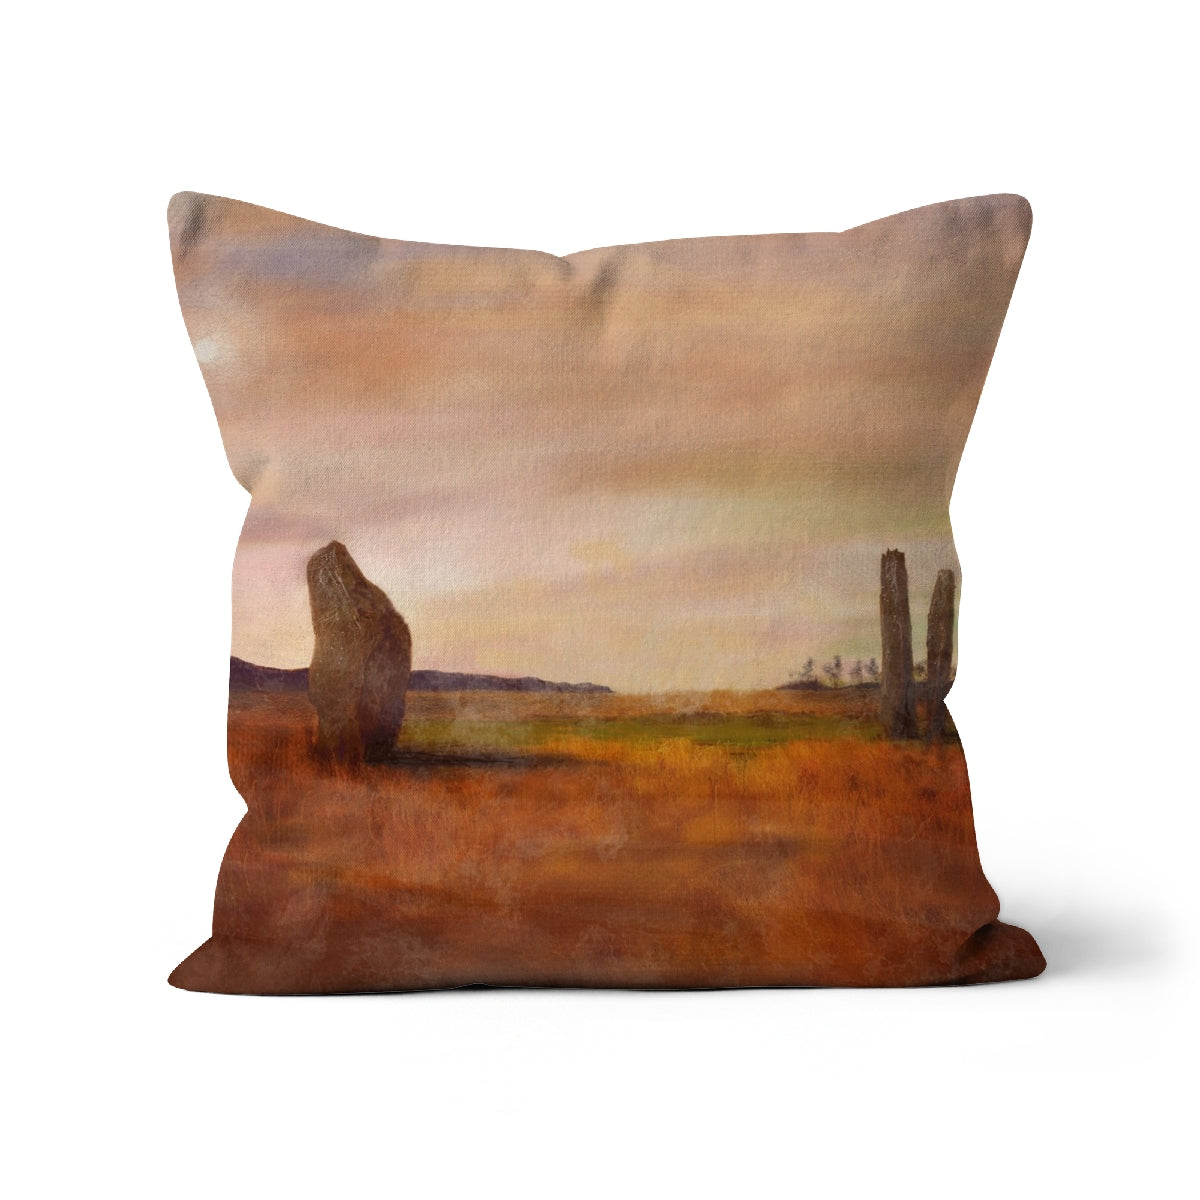 Machrie Moor Arran Art Gifts Cushion-Cushions-Arran Art Gallery-Faux Suede-12"x12"-Paintings, Prints, Homeware, Art Gifts From Scotland By Scottish Artist Kevin Hunter